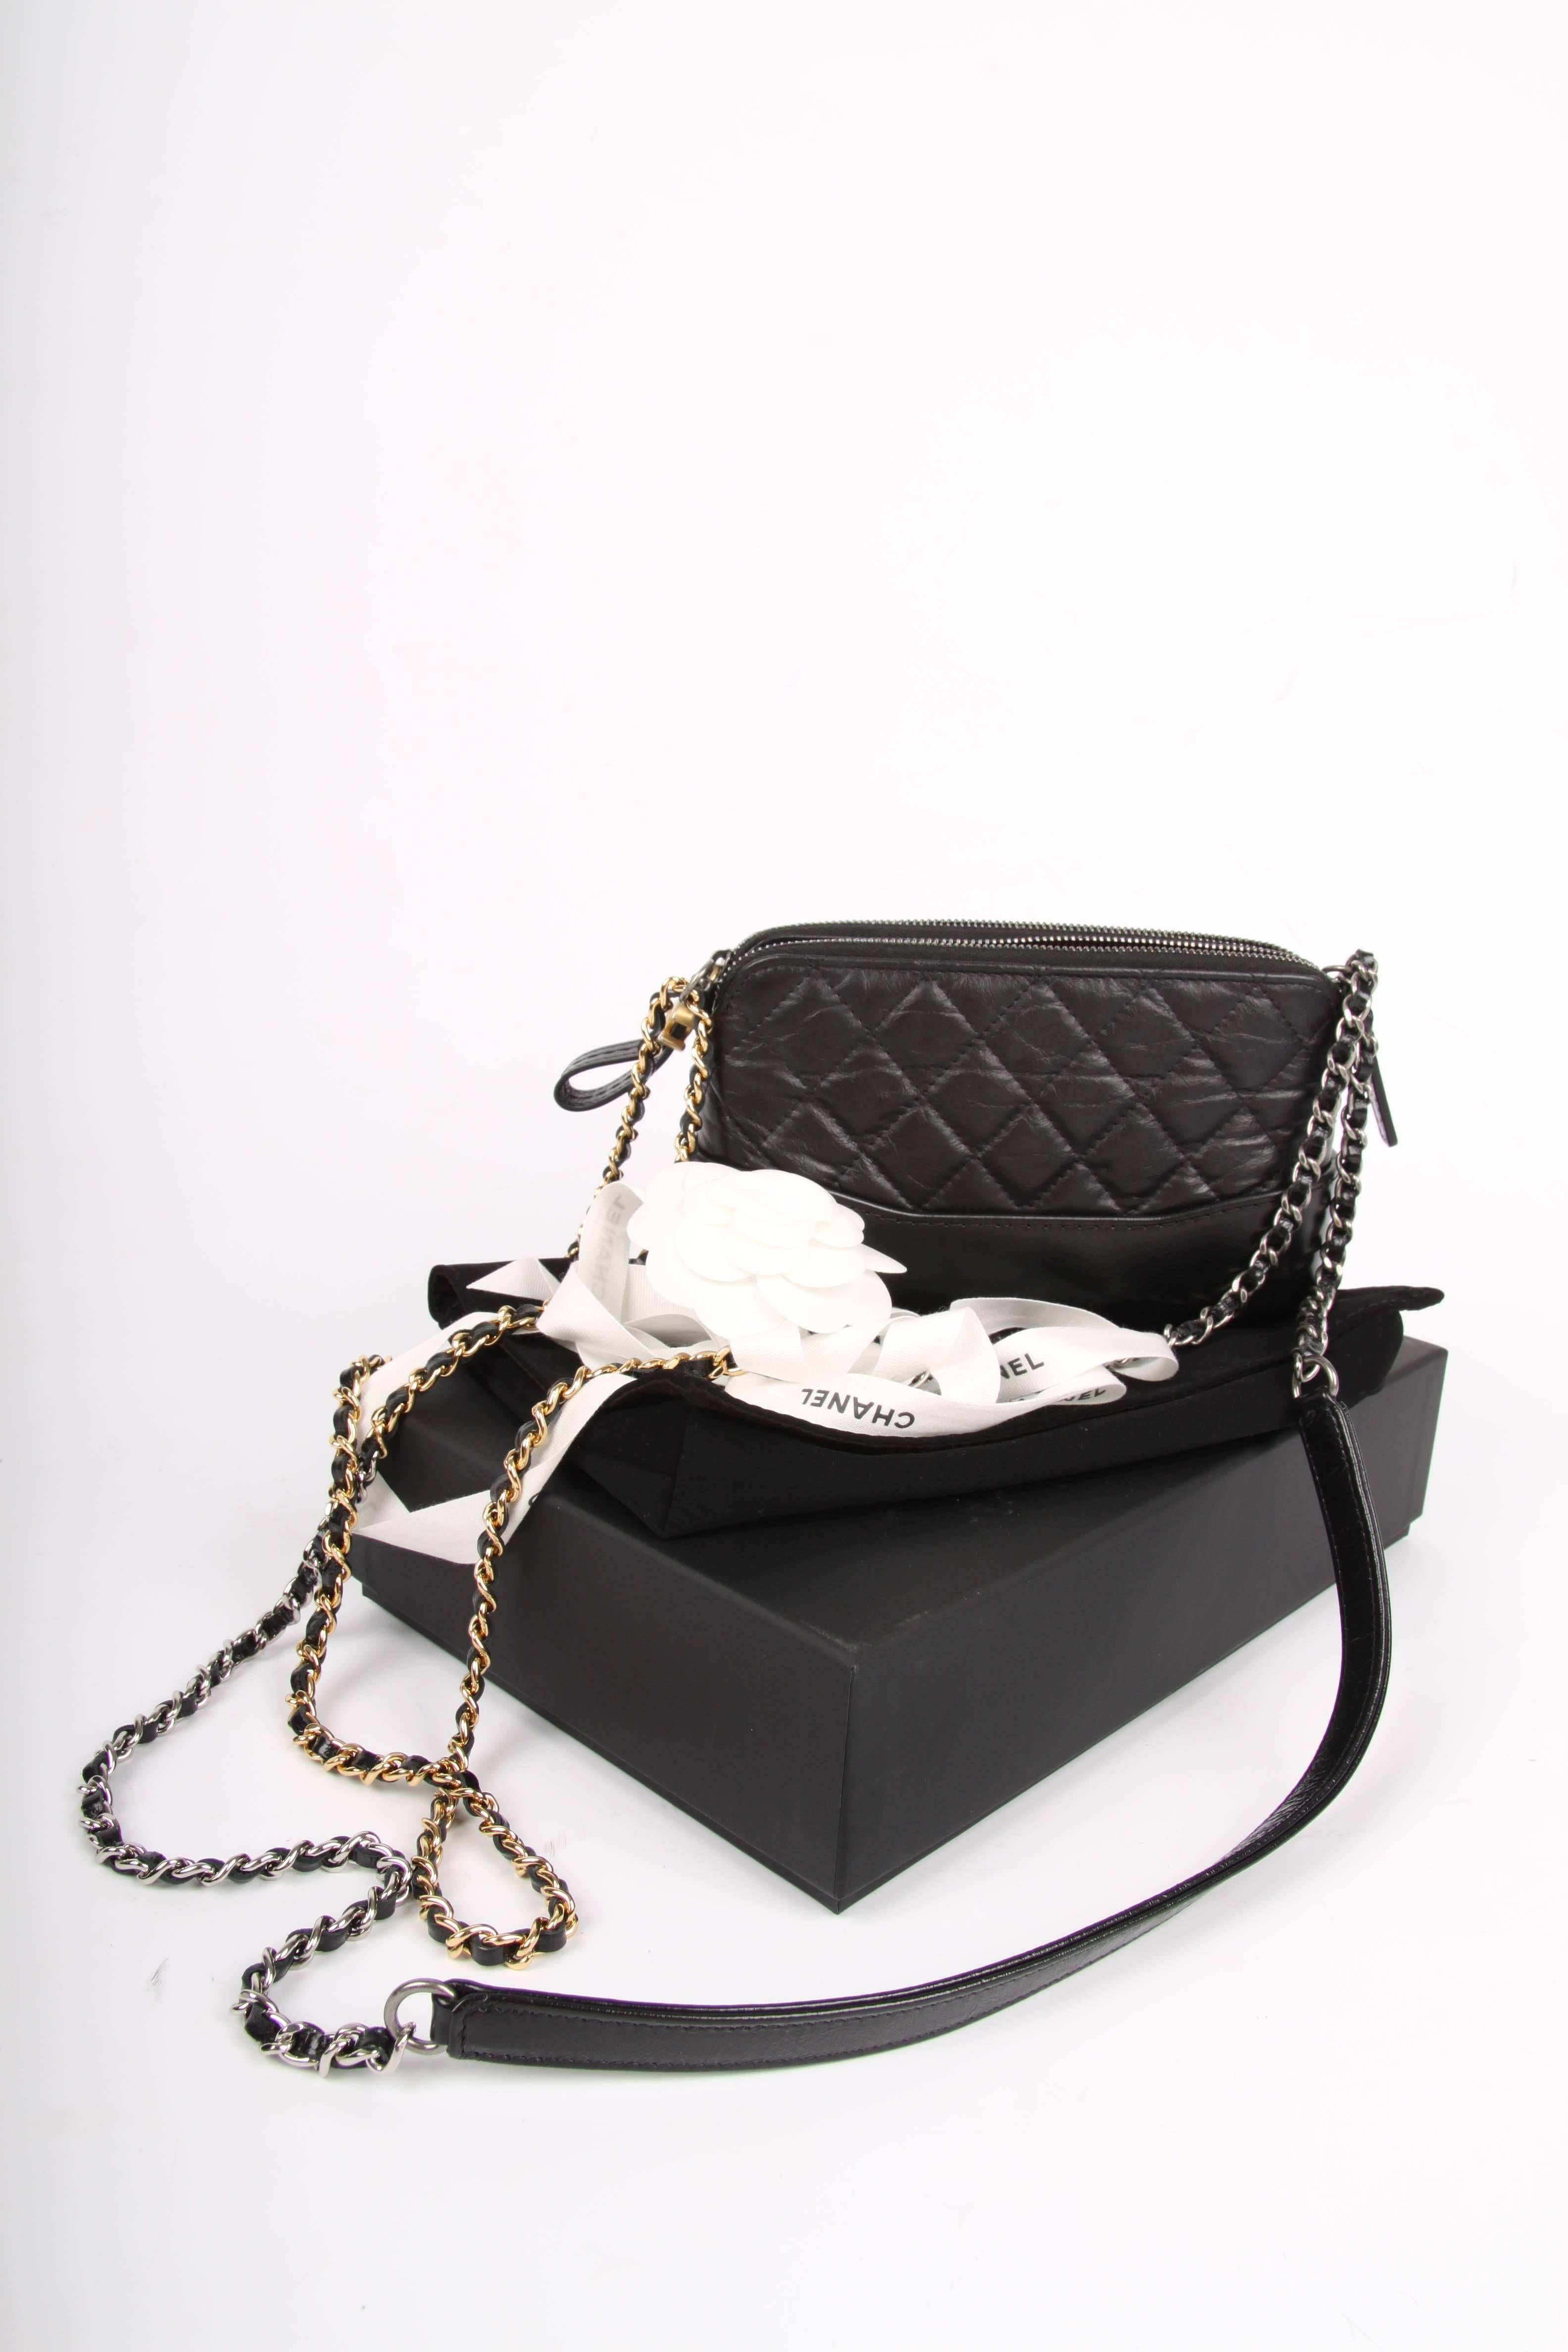 Wowwww! The Gabrielle Mini Bag, brand new and already super popular.

The gimmick of this bag is that it can be worn in different ways; on the shoulder, double on the shoulder and even as a belt bag. This is created by the extra long chain wich